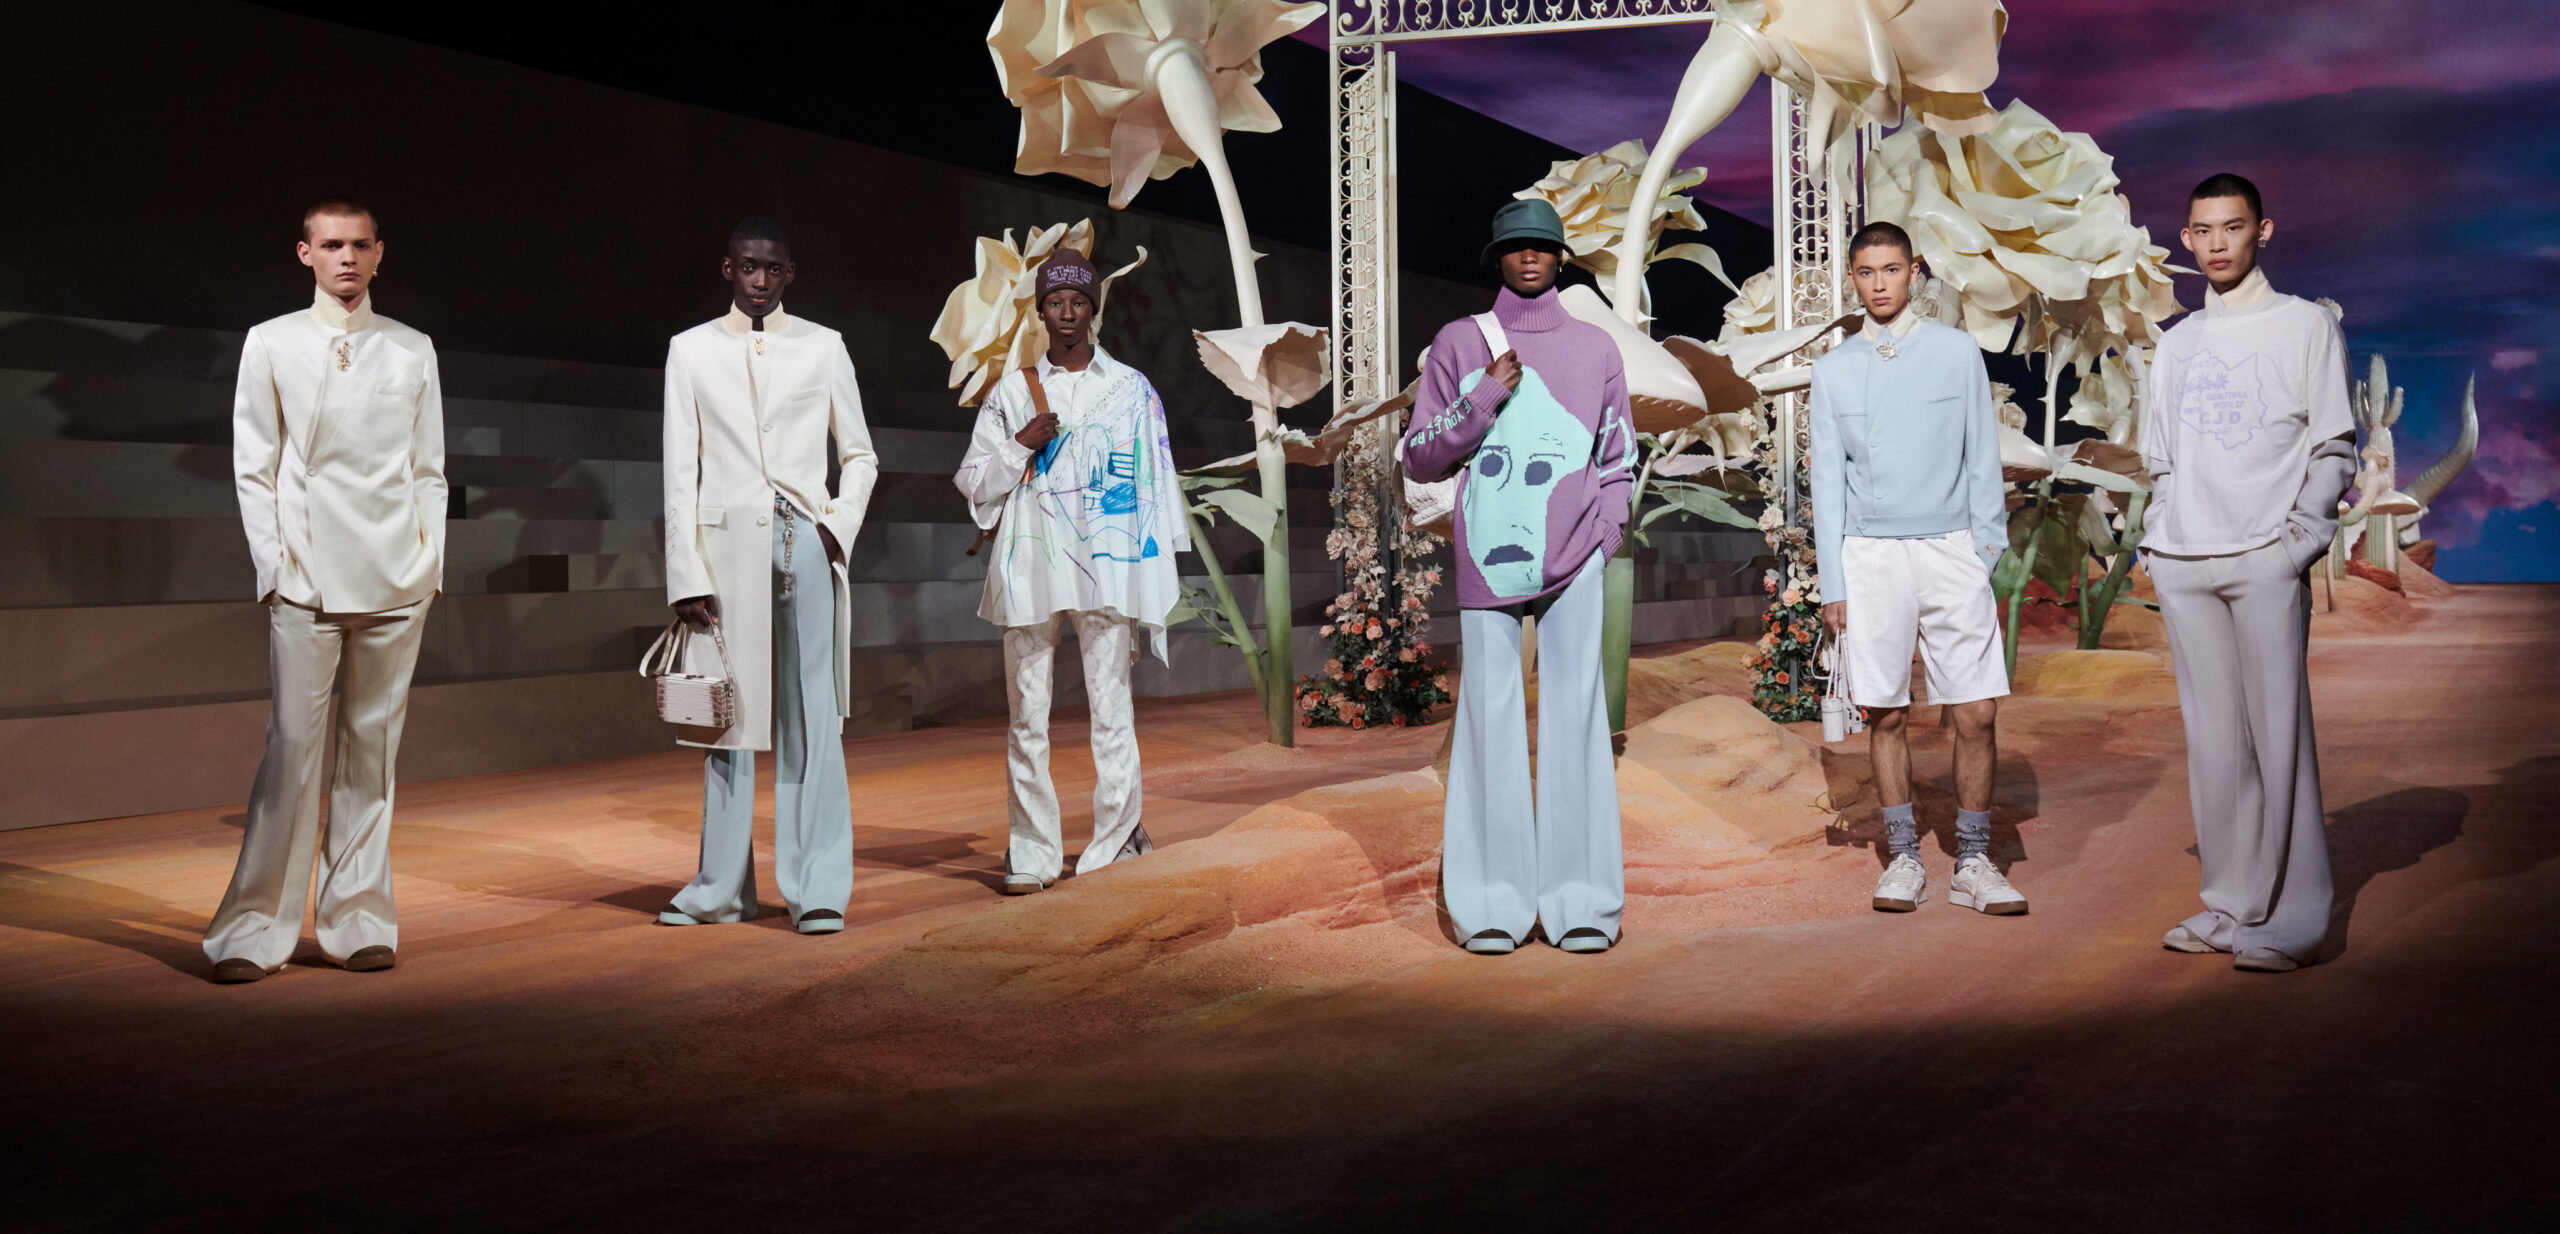 dior-reveals-a-collection-co-created-by-travis-scott-+-other-fashion-news-you-might-have-missed